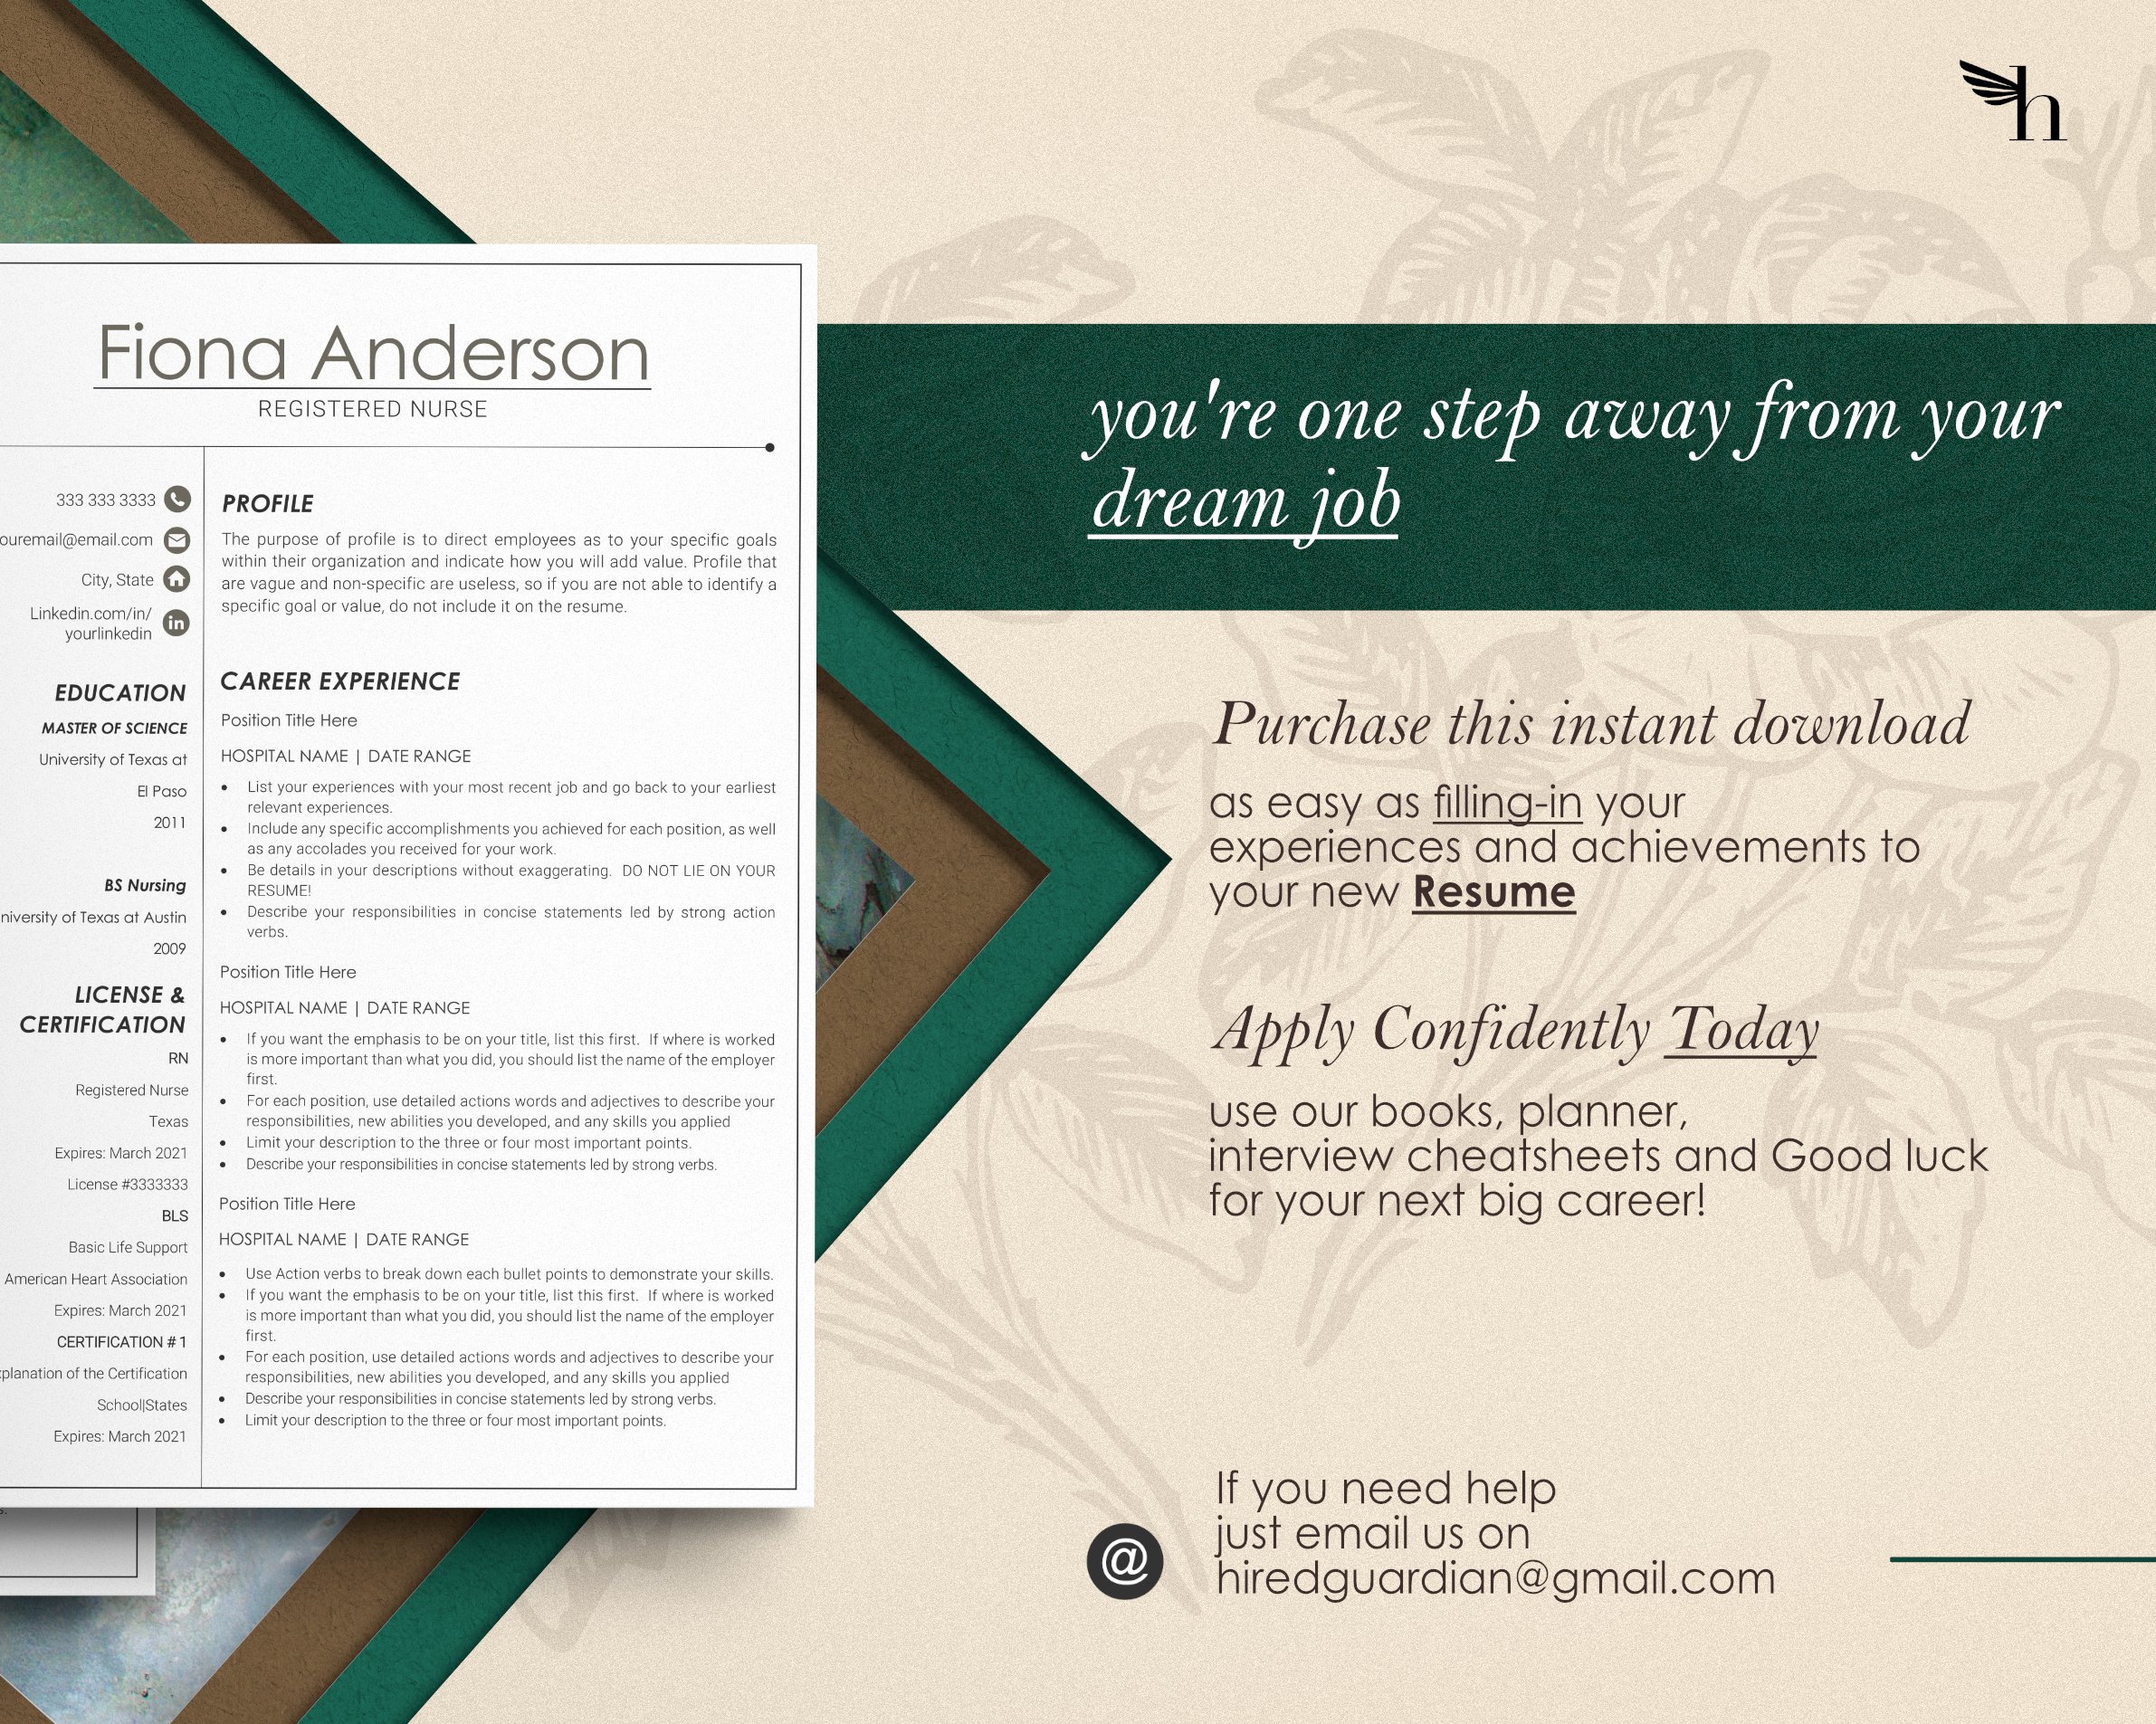 Green and white resume with a green border.